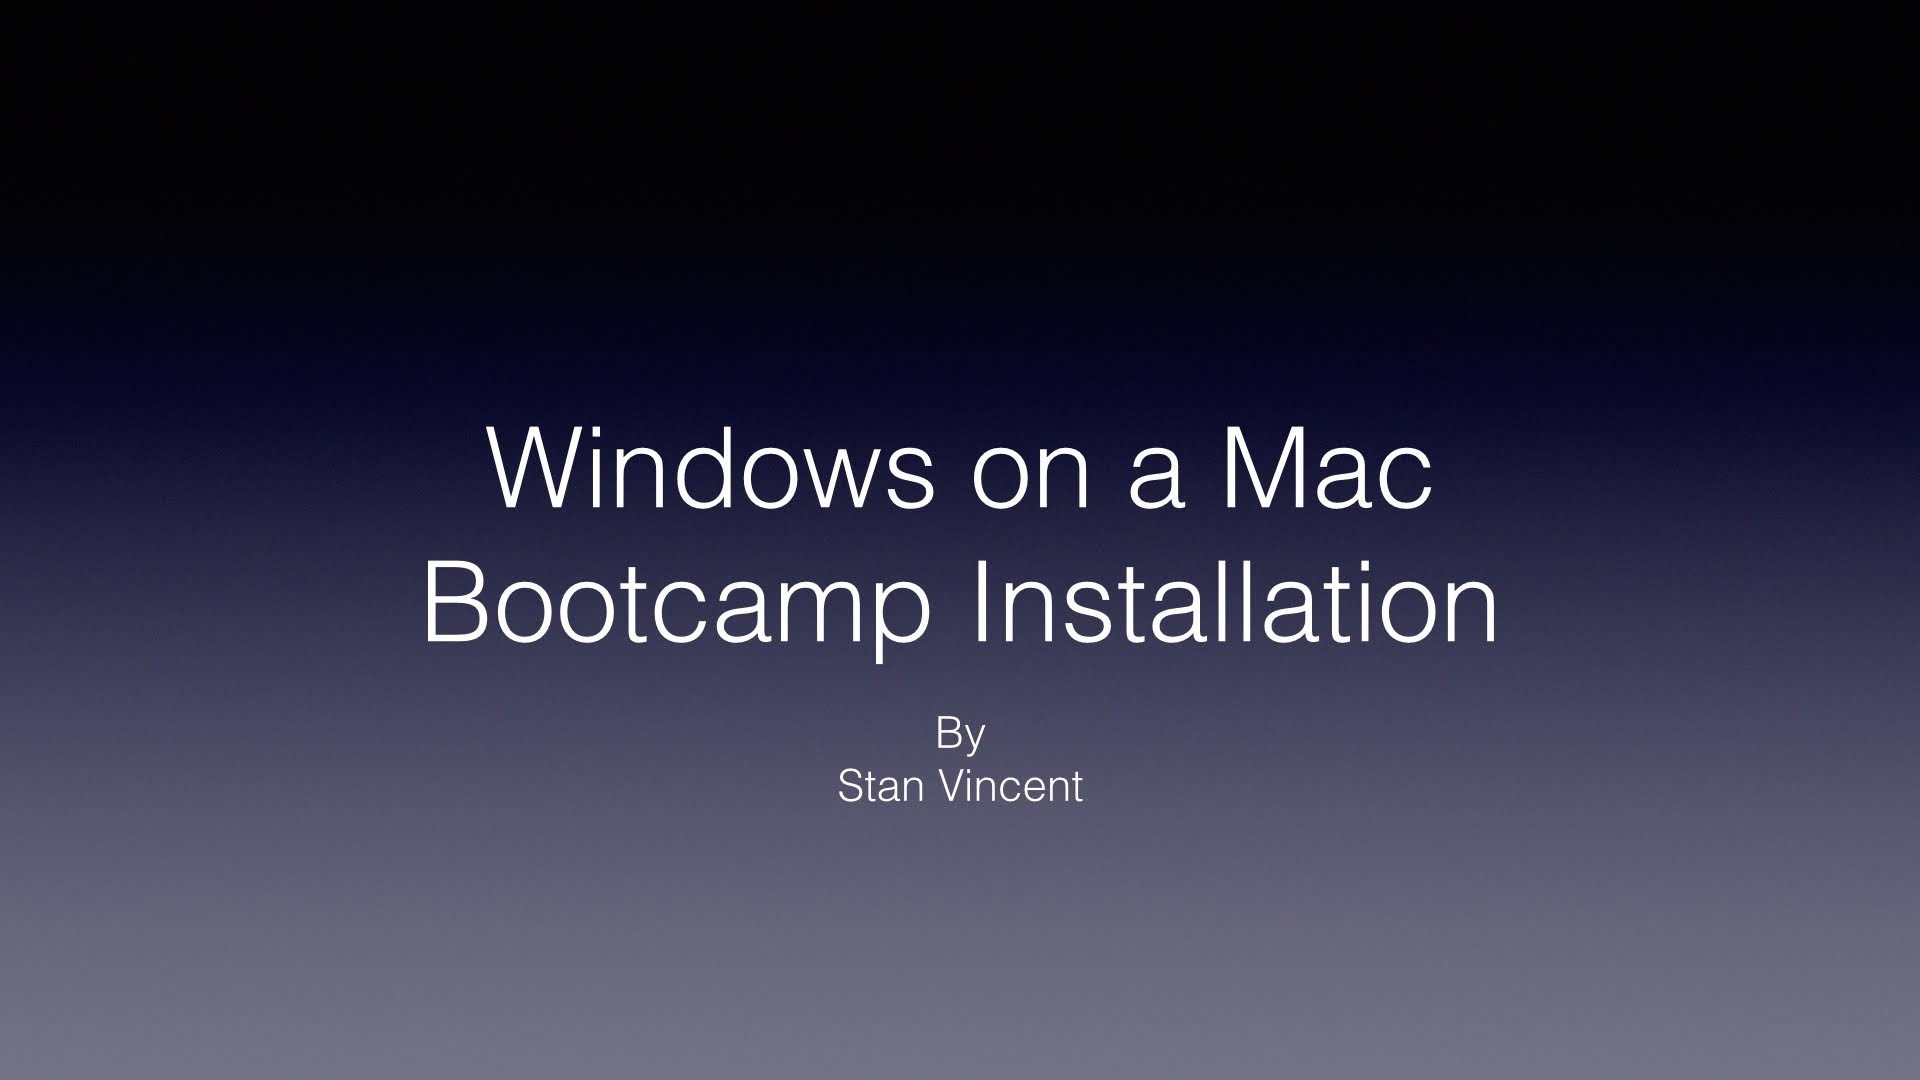 1920x1080 Windows on a Mac | How to install Windows 8 on a Mac Book Pro | Apple |  Bootcamp